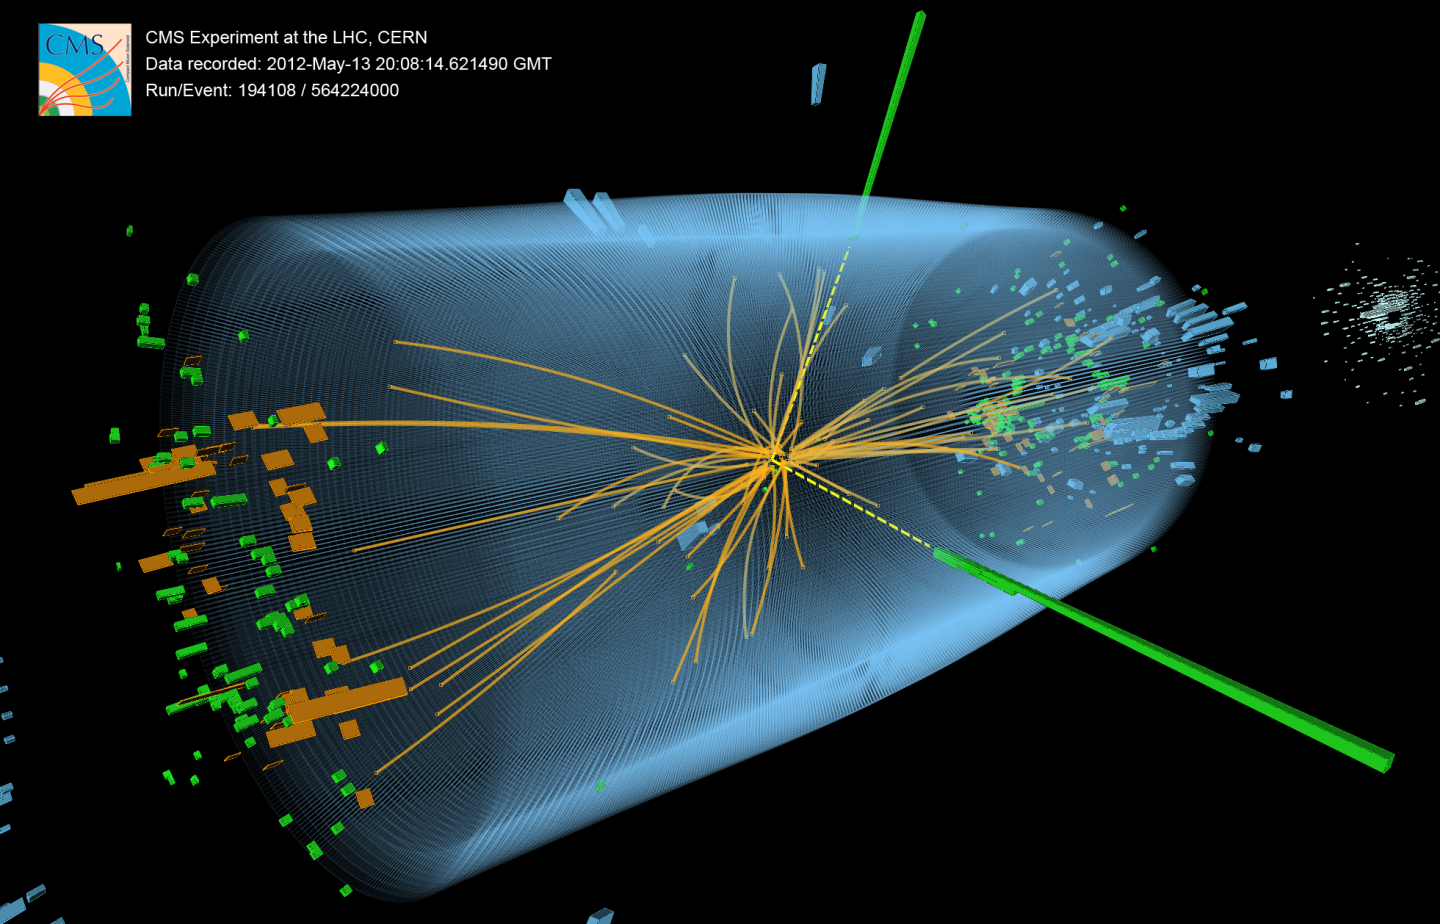 3D_view_of_an_event_recorded_with_the_CMS_detector_in_2012_at_a_proton-proton_centre_of_mass_energy_of_8_TeV